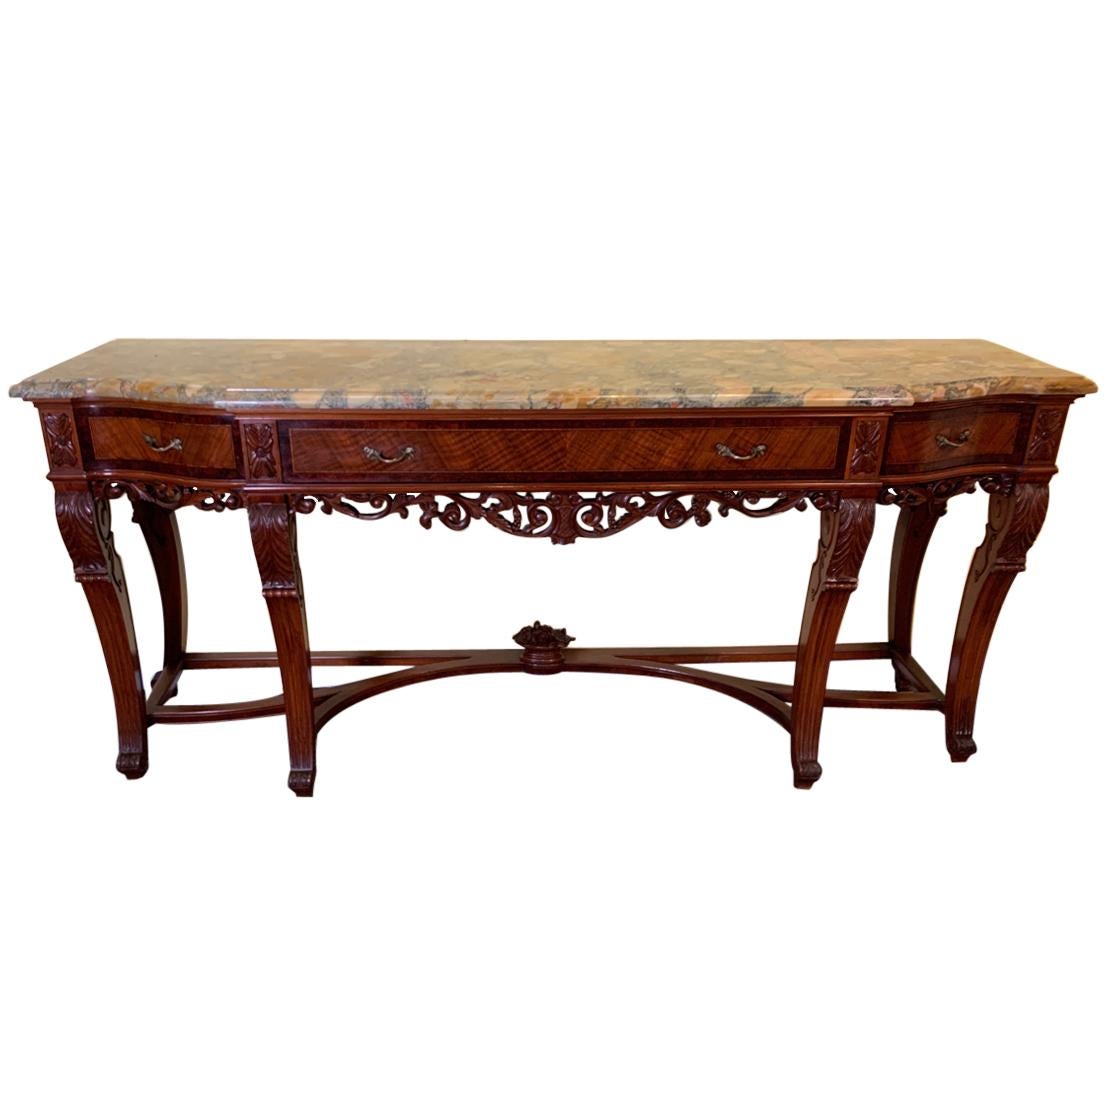 Continental Carved Walnut and Inlaid Marble-Top Console/Sideboard, circa 1900